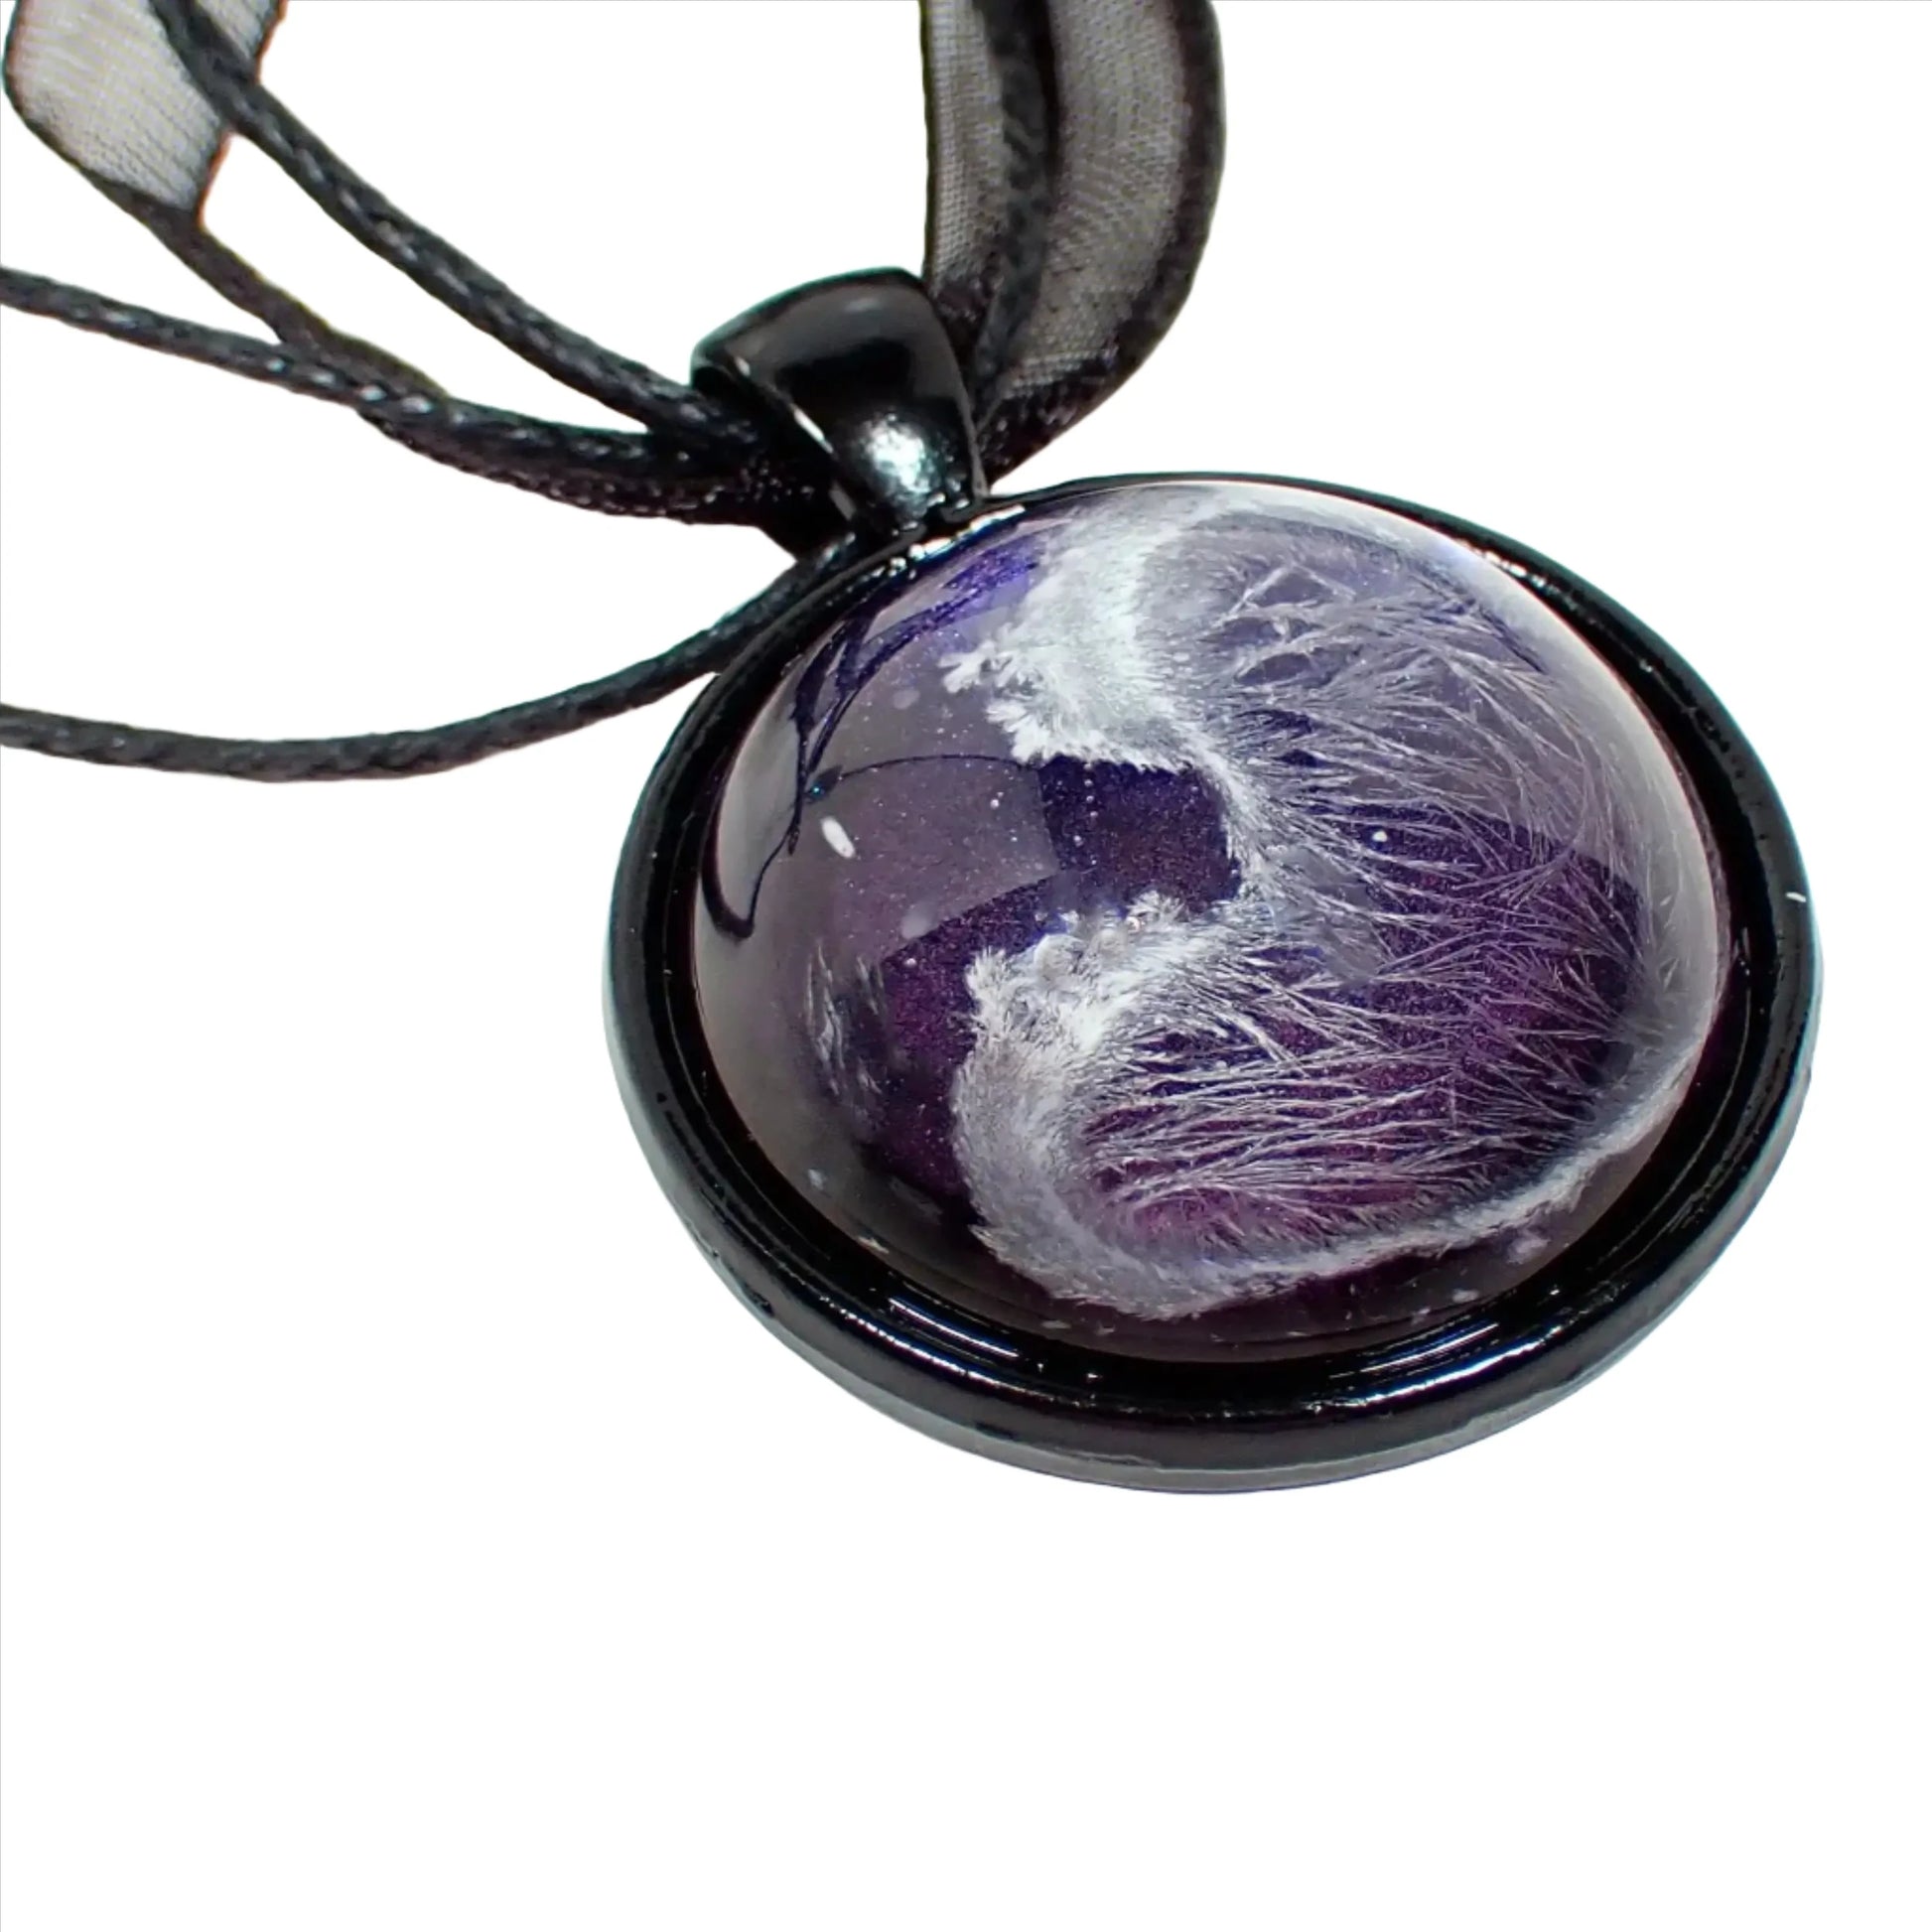 Enlarged view of the handmade resin pendant. The necklace part shows three black strands of faux leather cord and a strand of organza ribbon. There is a black coated round pendant with a domed resin cab. The resin has an iridescent purple background and an abstract frost design in white through it.